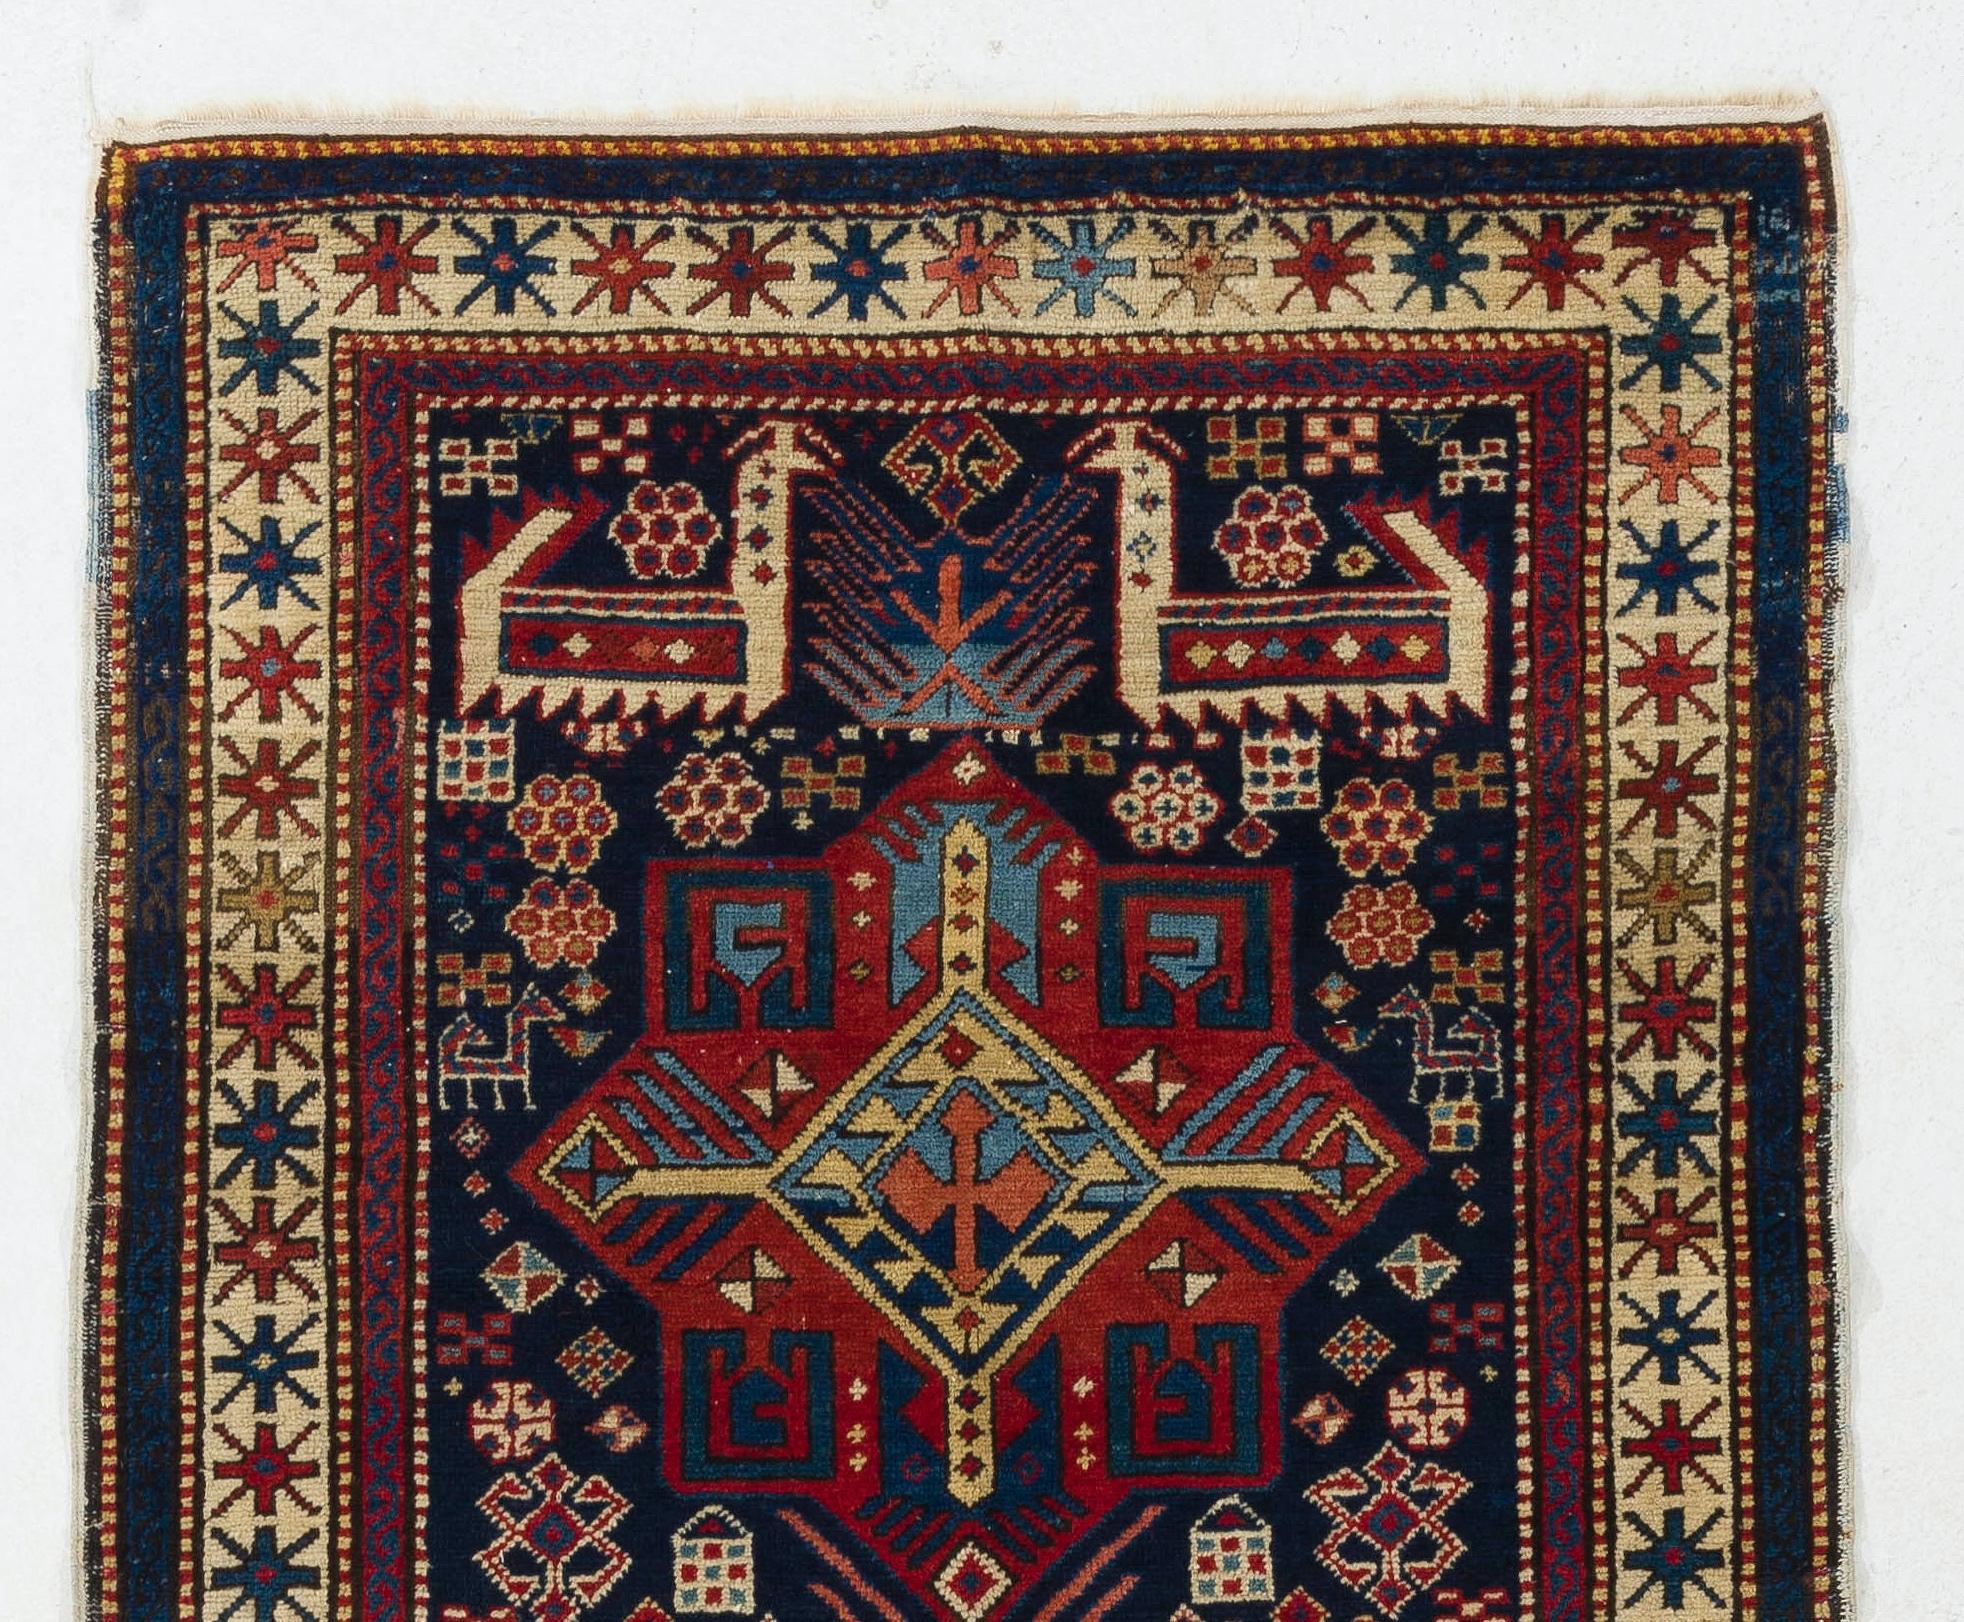 A rare and prized Shirvan Akstafa rug that is visually stunning and highly expressive with a very distinct tribal and historic character. What distinguishes the style of an Akstafa is its rendering of the very special symbol of ‘peacocks’, which